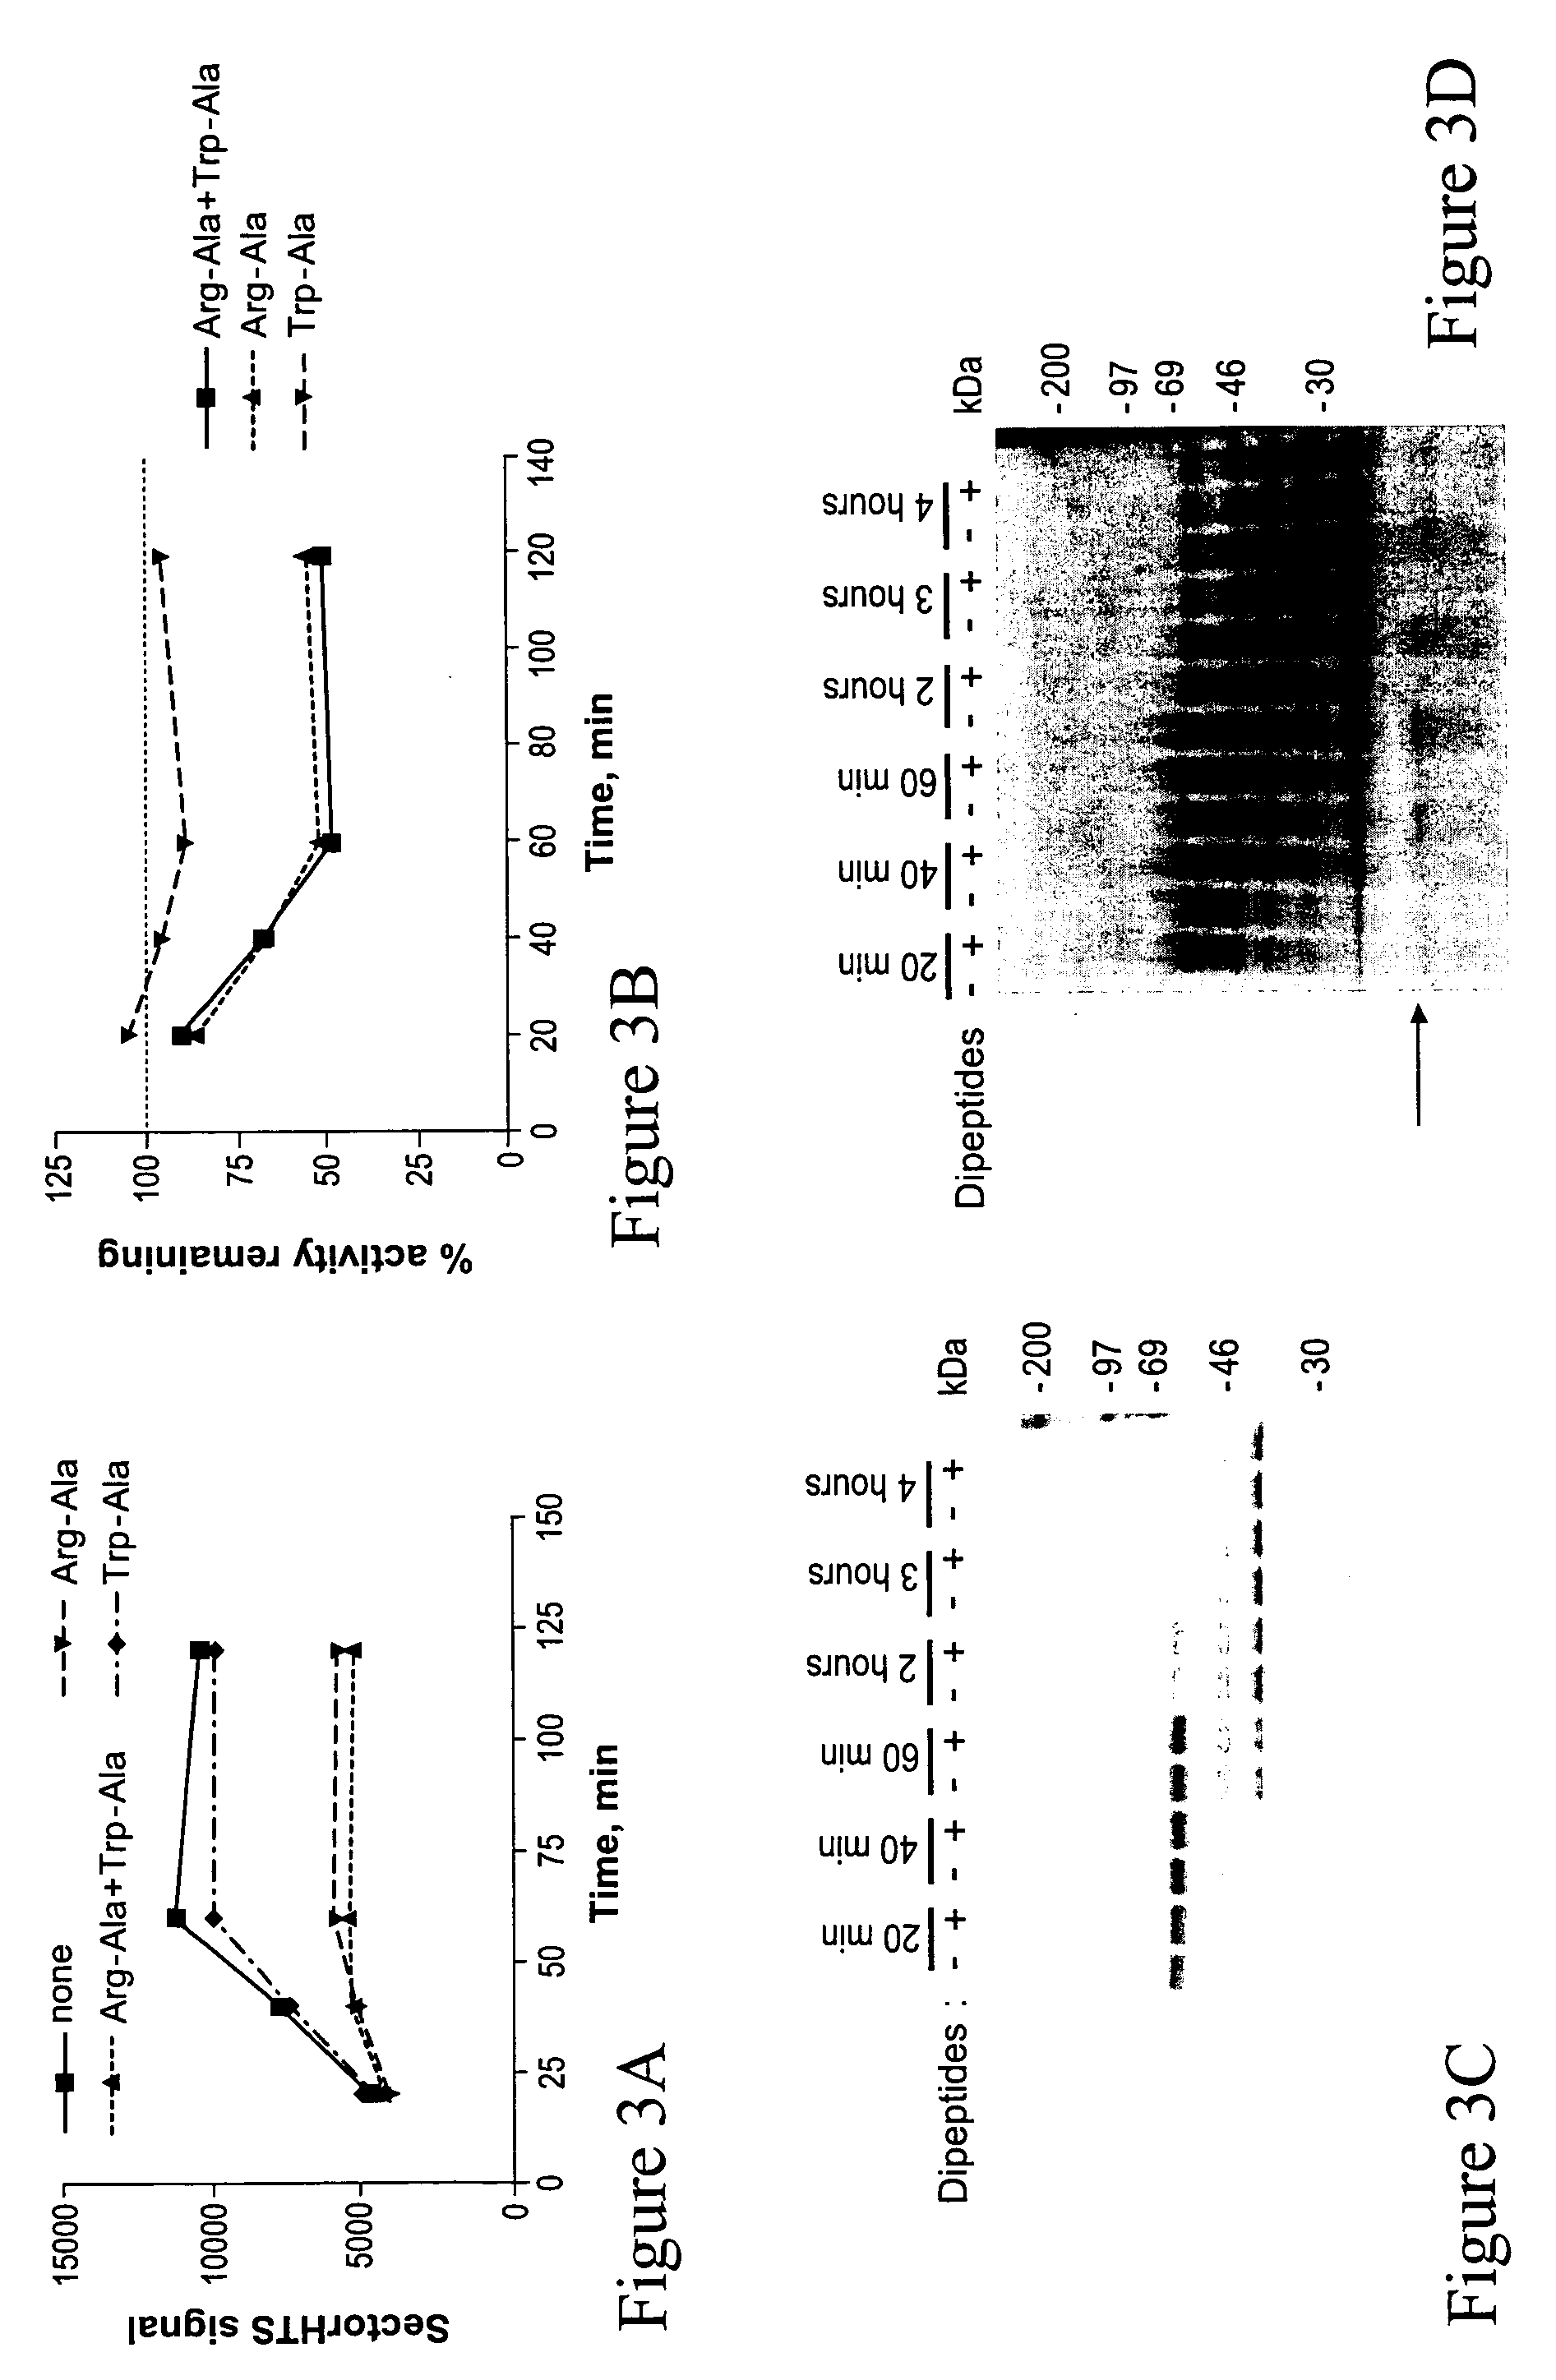 Substrates of N-end rule ubiquitylation and methods for measuring the ubiquitylation of these substrates